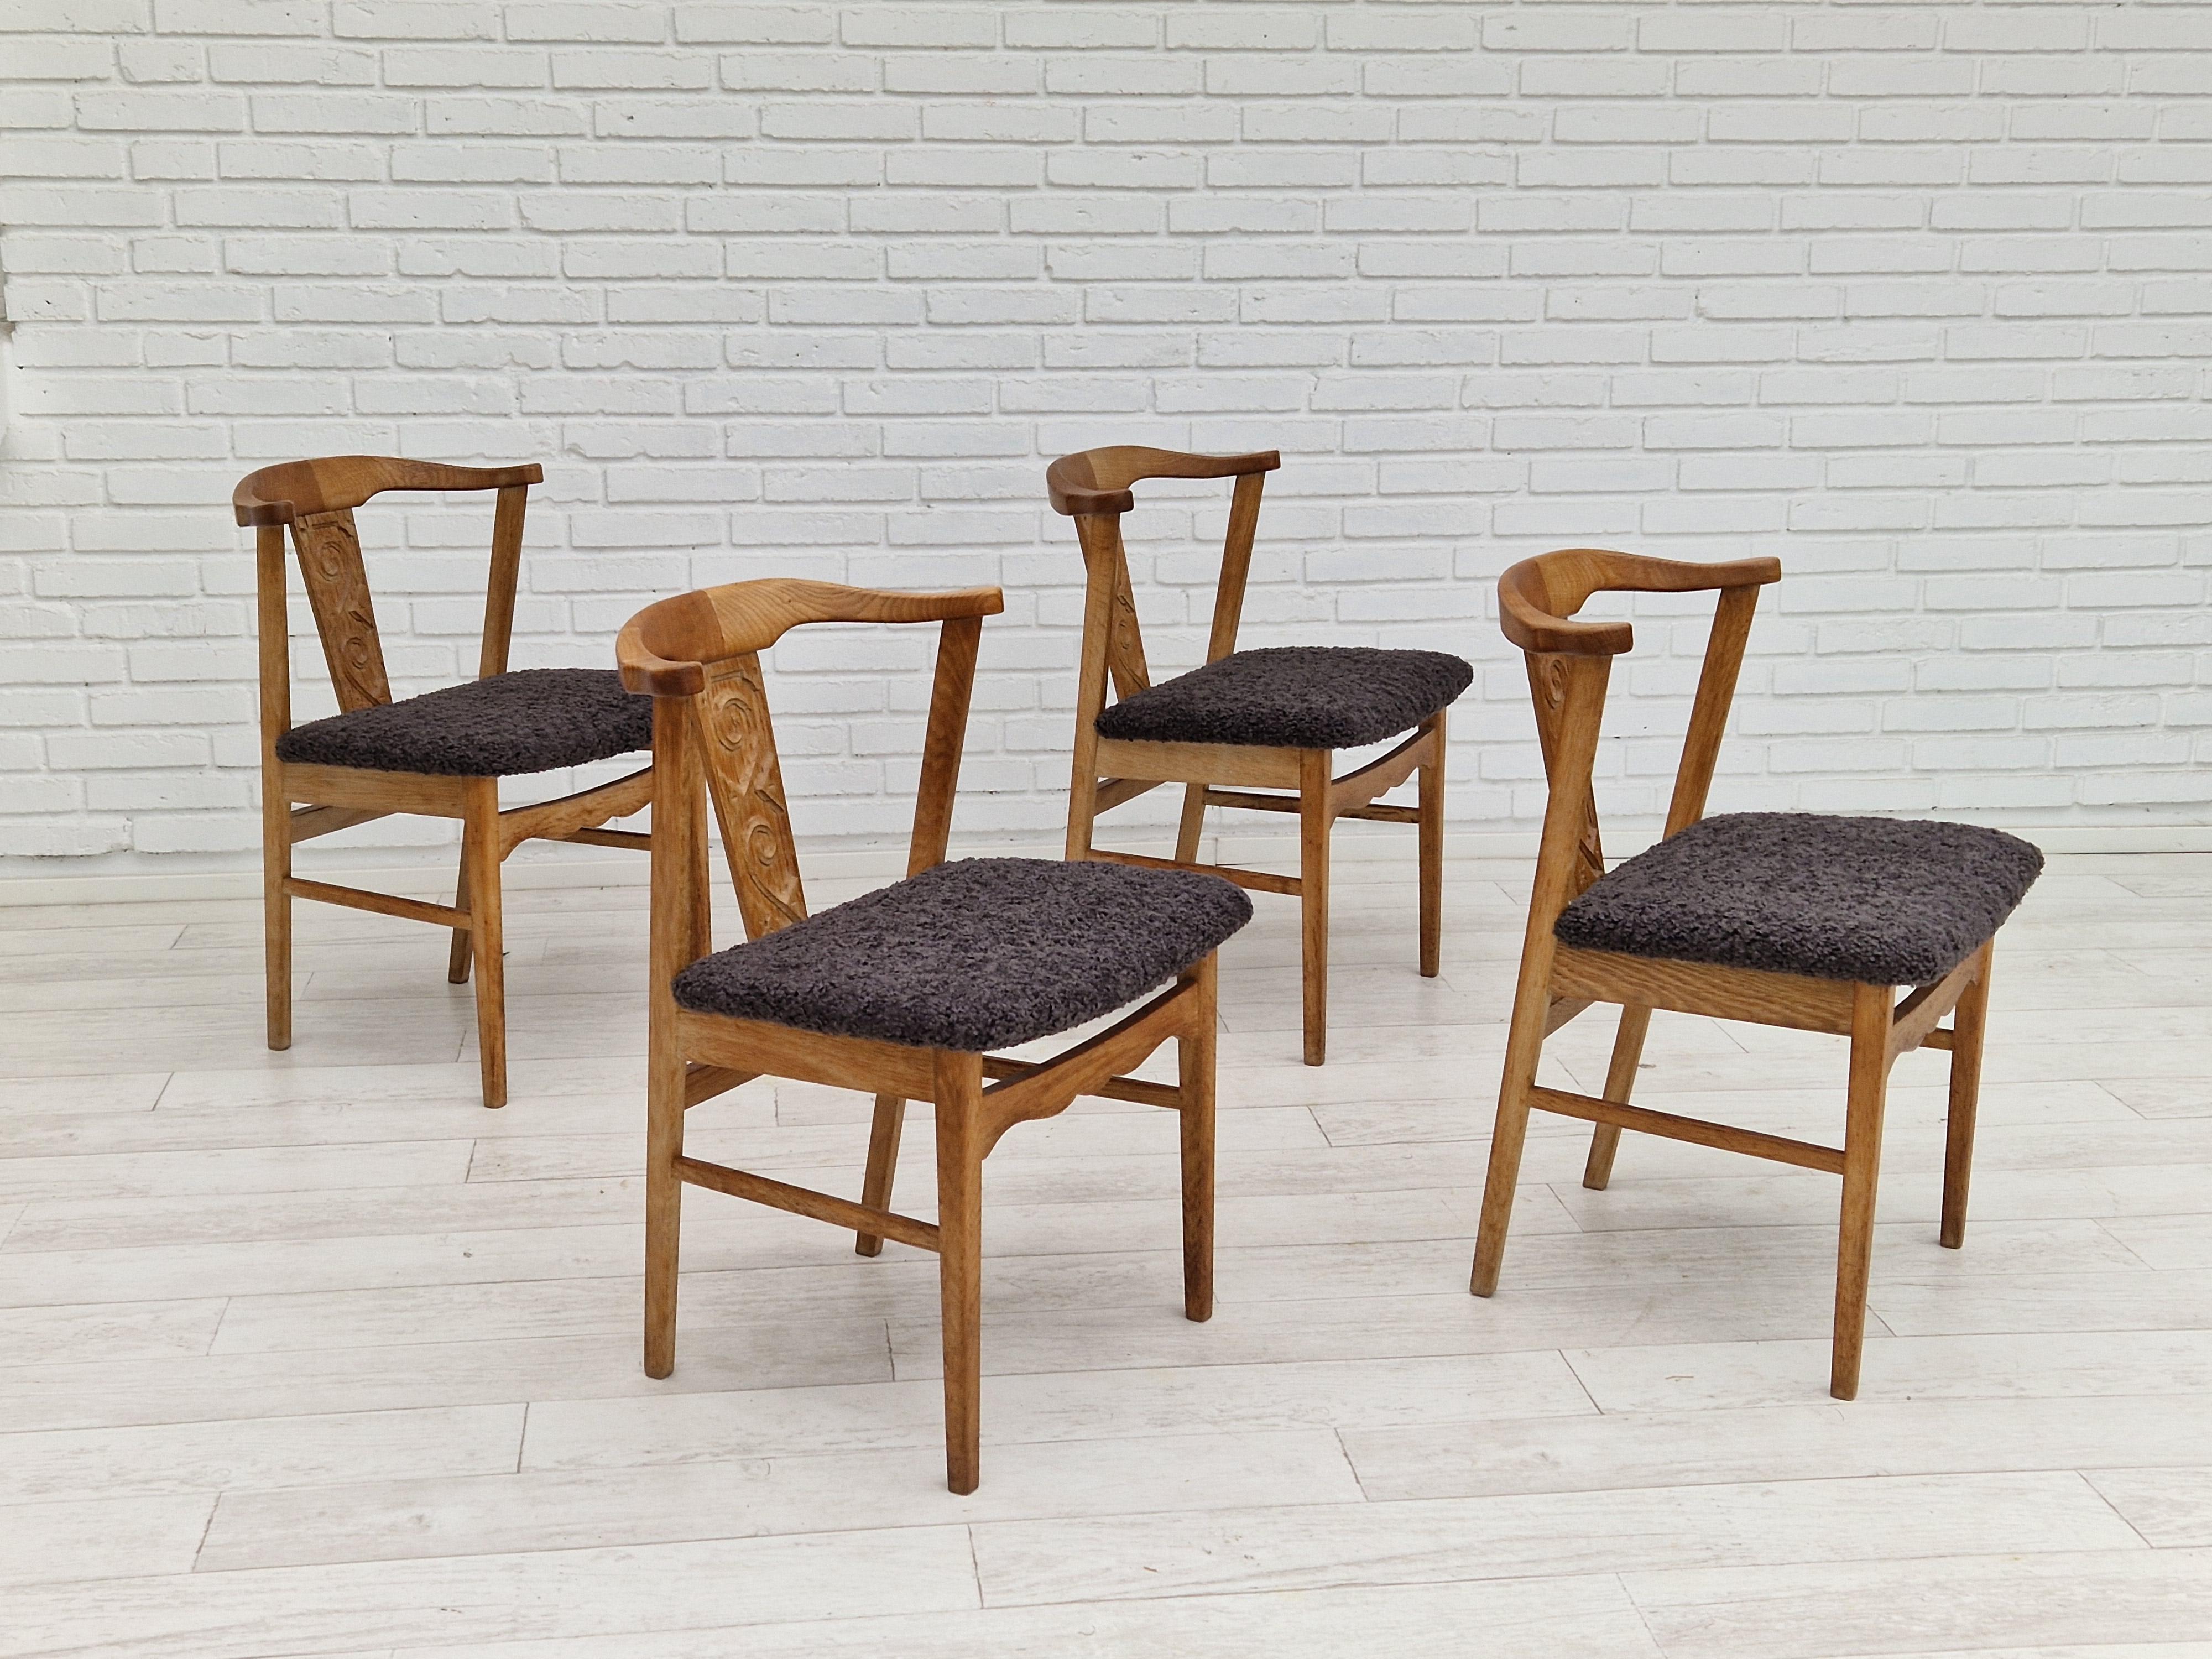 1960s, Danish Design, Set of 4 Dinning Chairs, Oak Wood, Reupholstered In Good Condition For Sale In Tarm, 82